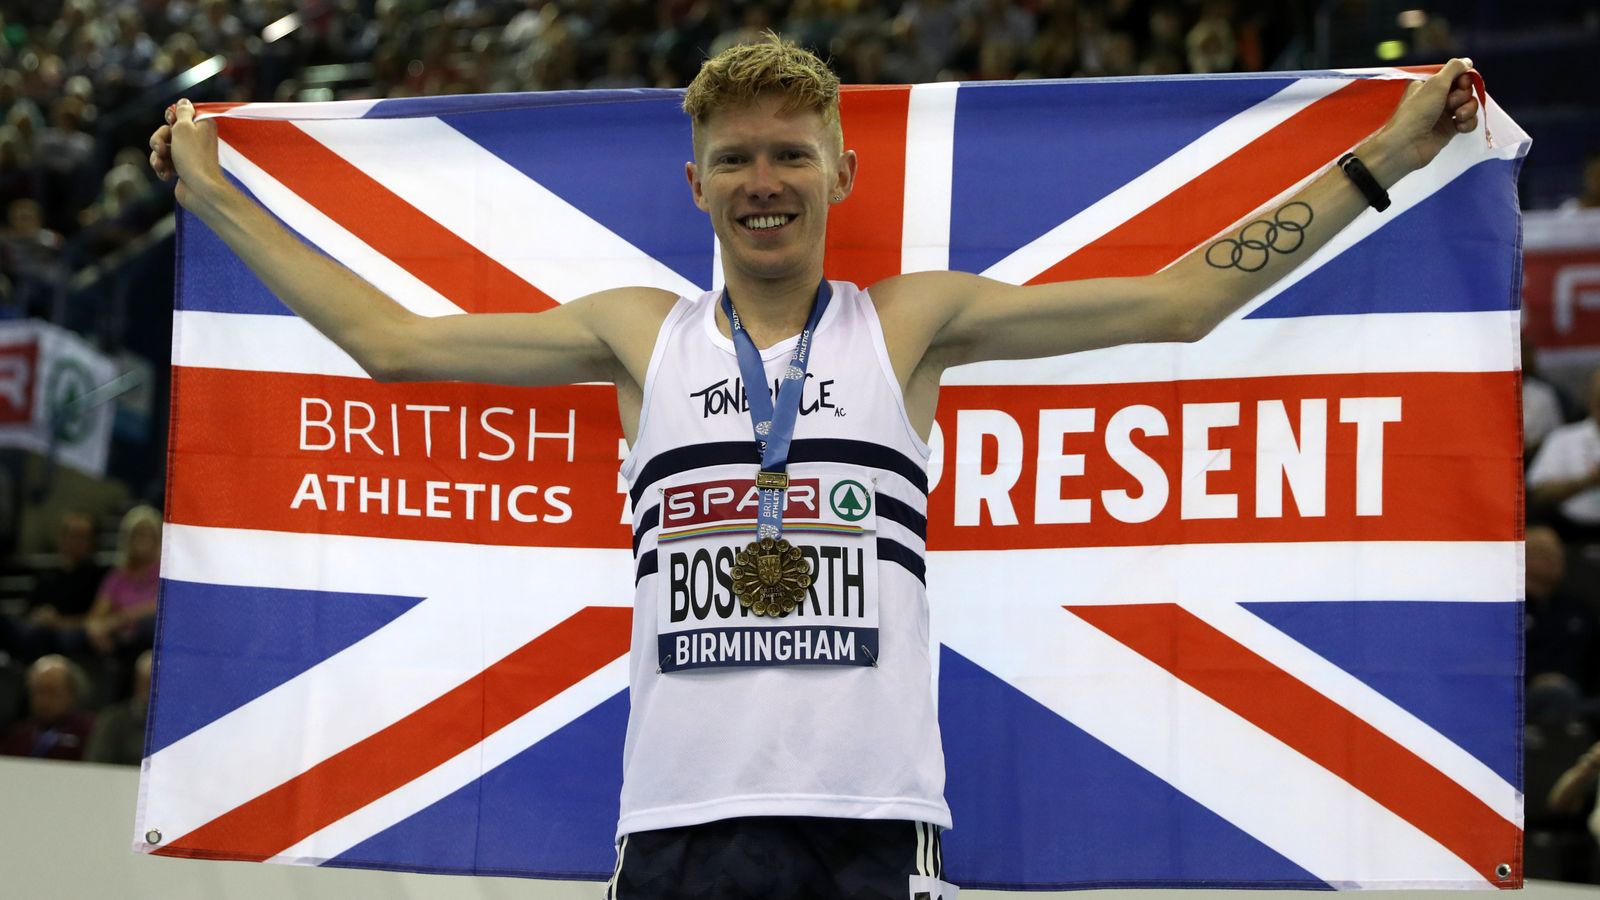 Tom Bosworth to retire from race walking after Commonwealth Games